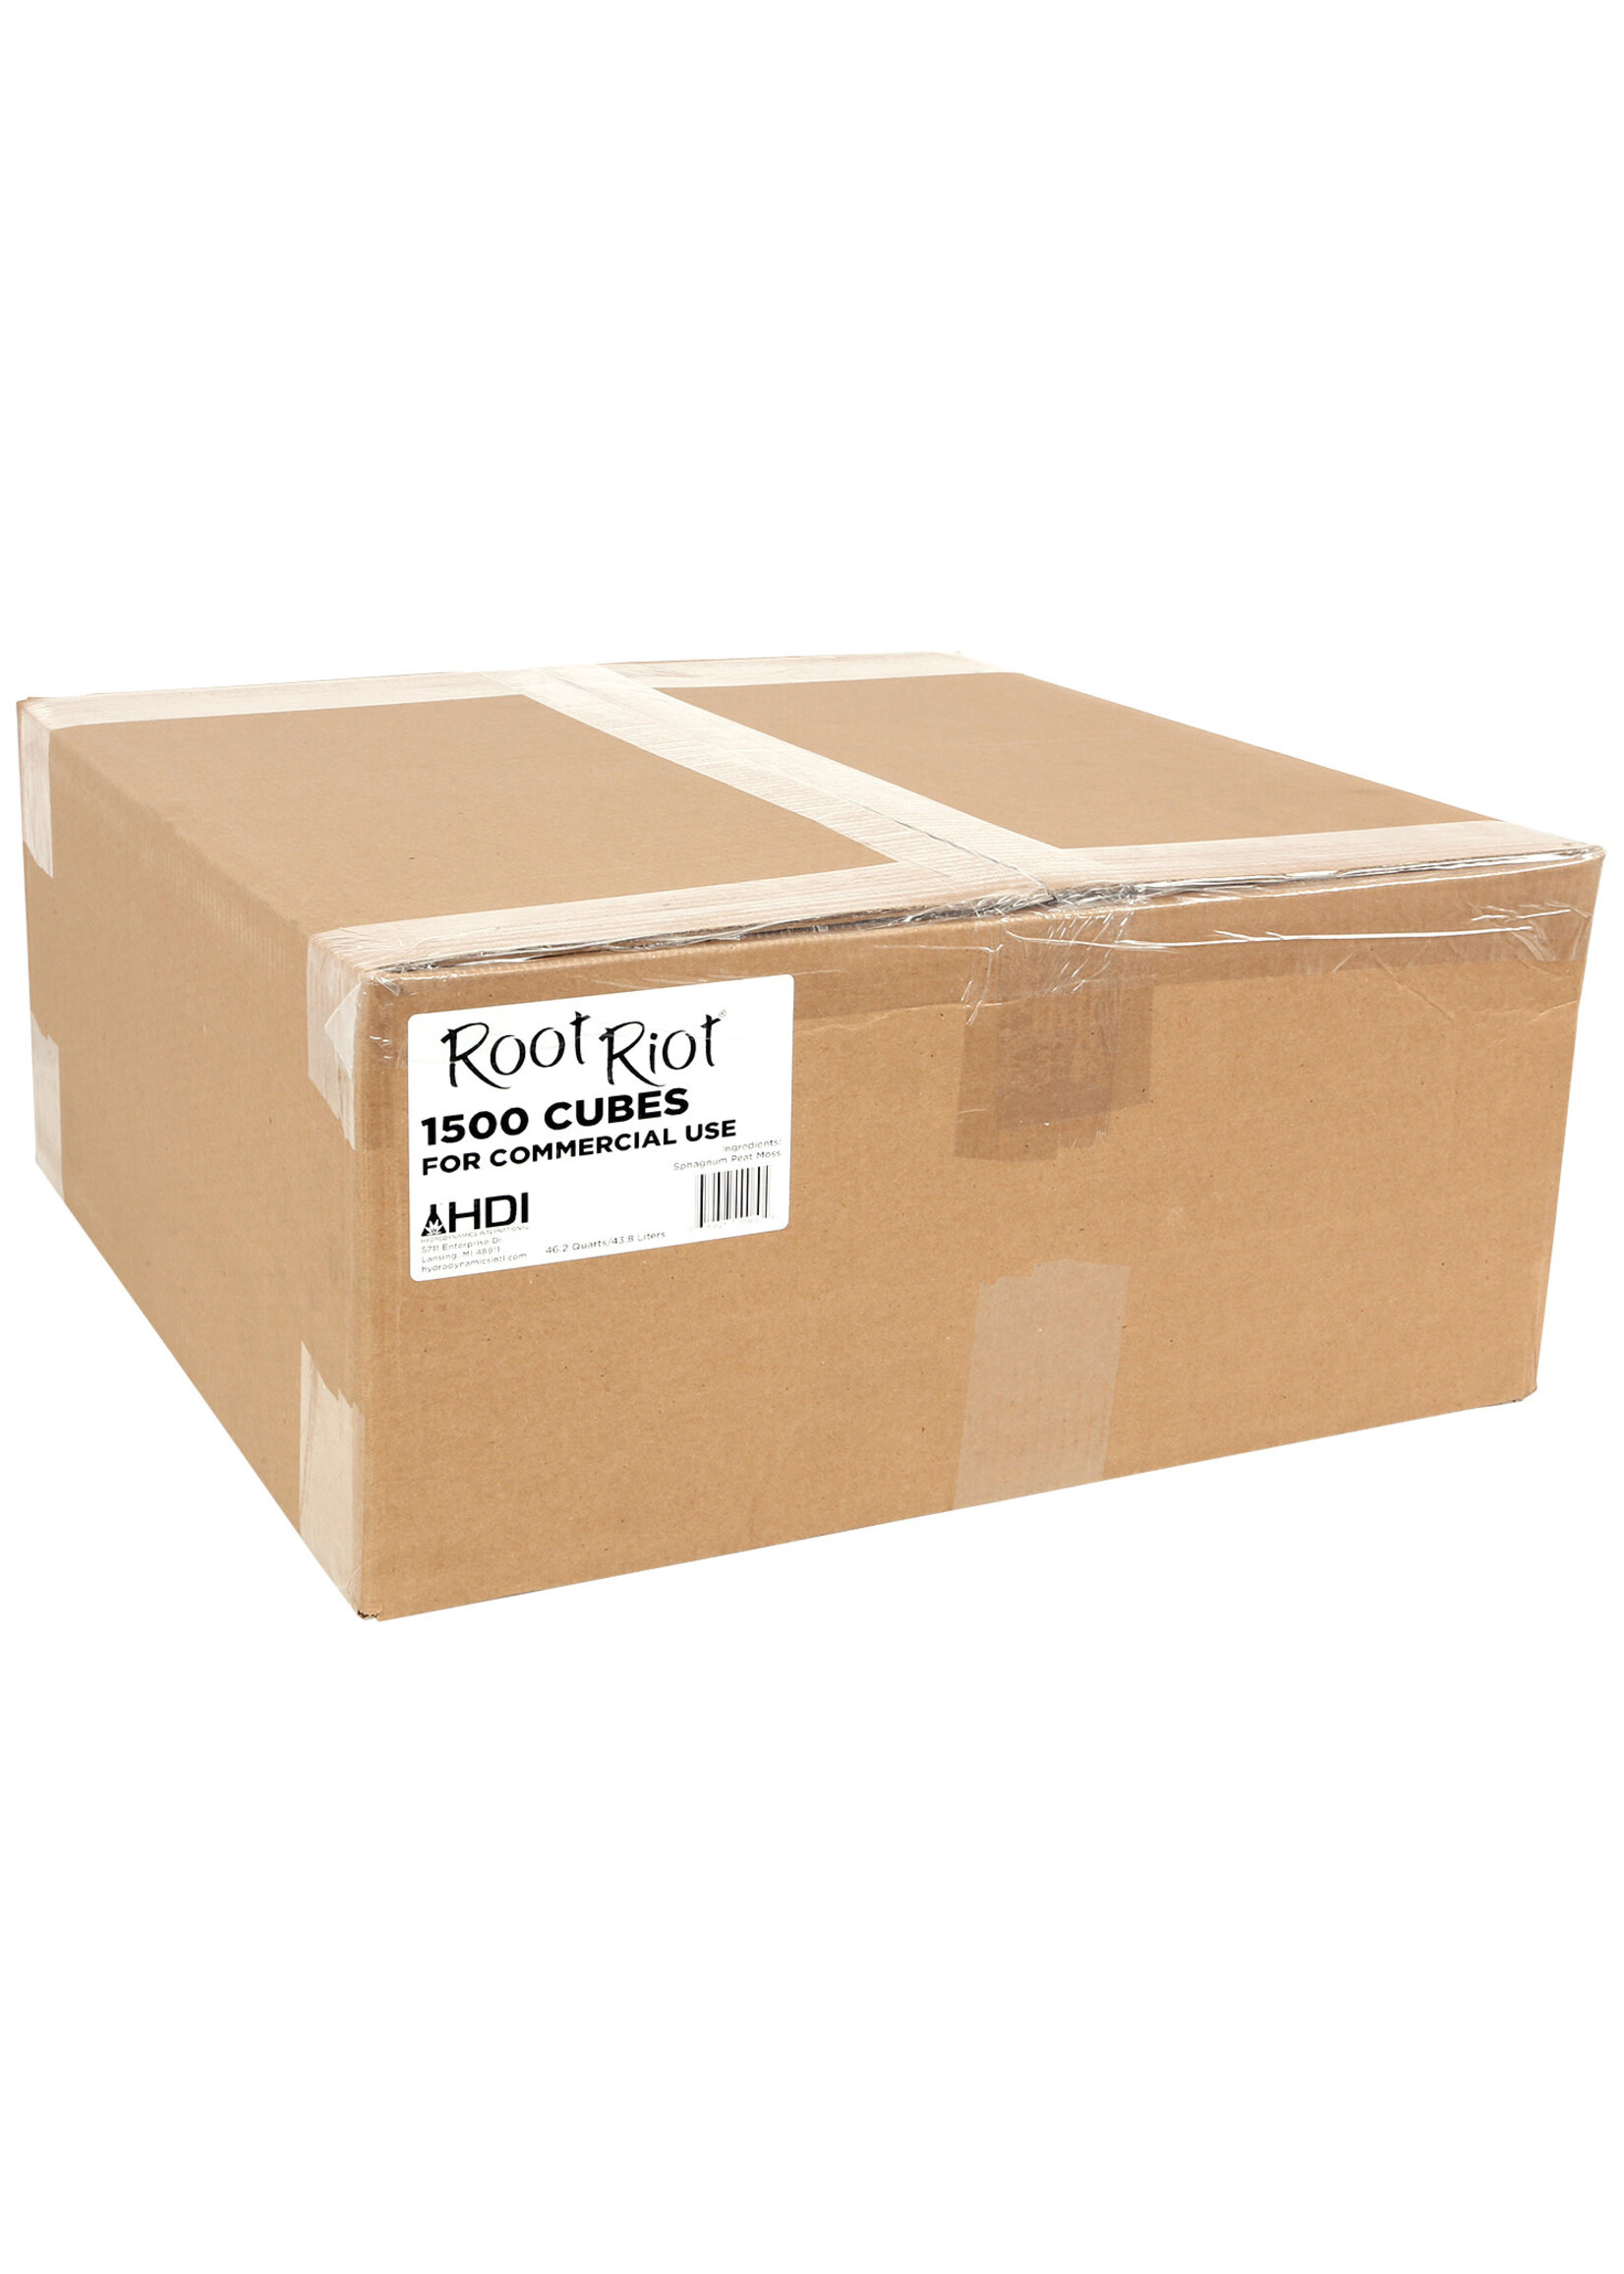 Hydro Dynamics Root Riot Replacement Cubes - 1500 Cubes